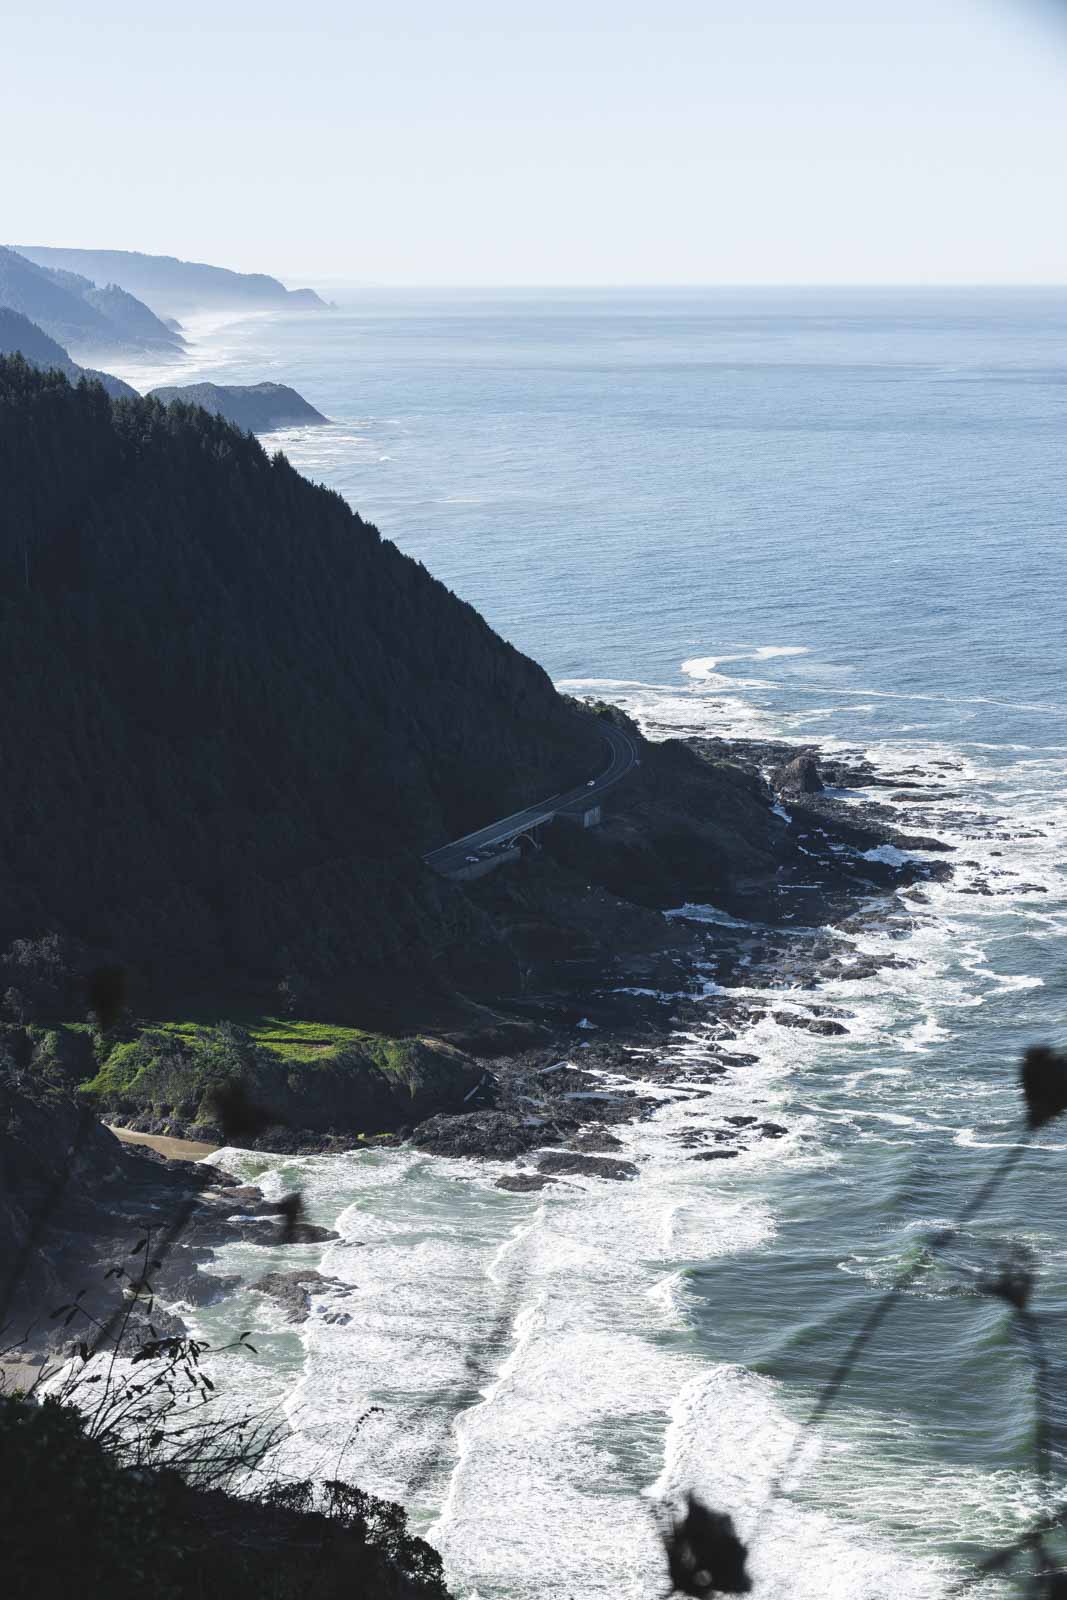 Looking out over headland, beach and ocean of Cape Perpetua in Oregon